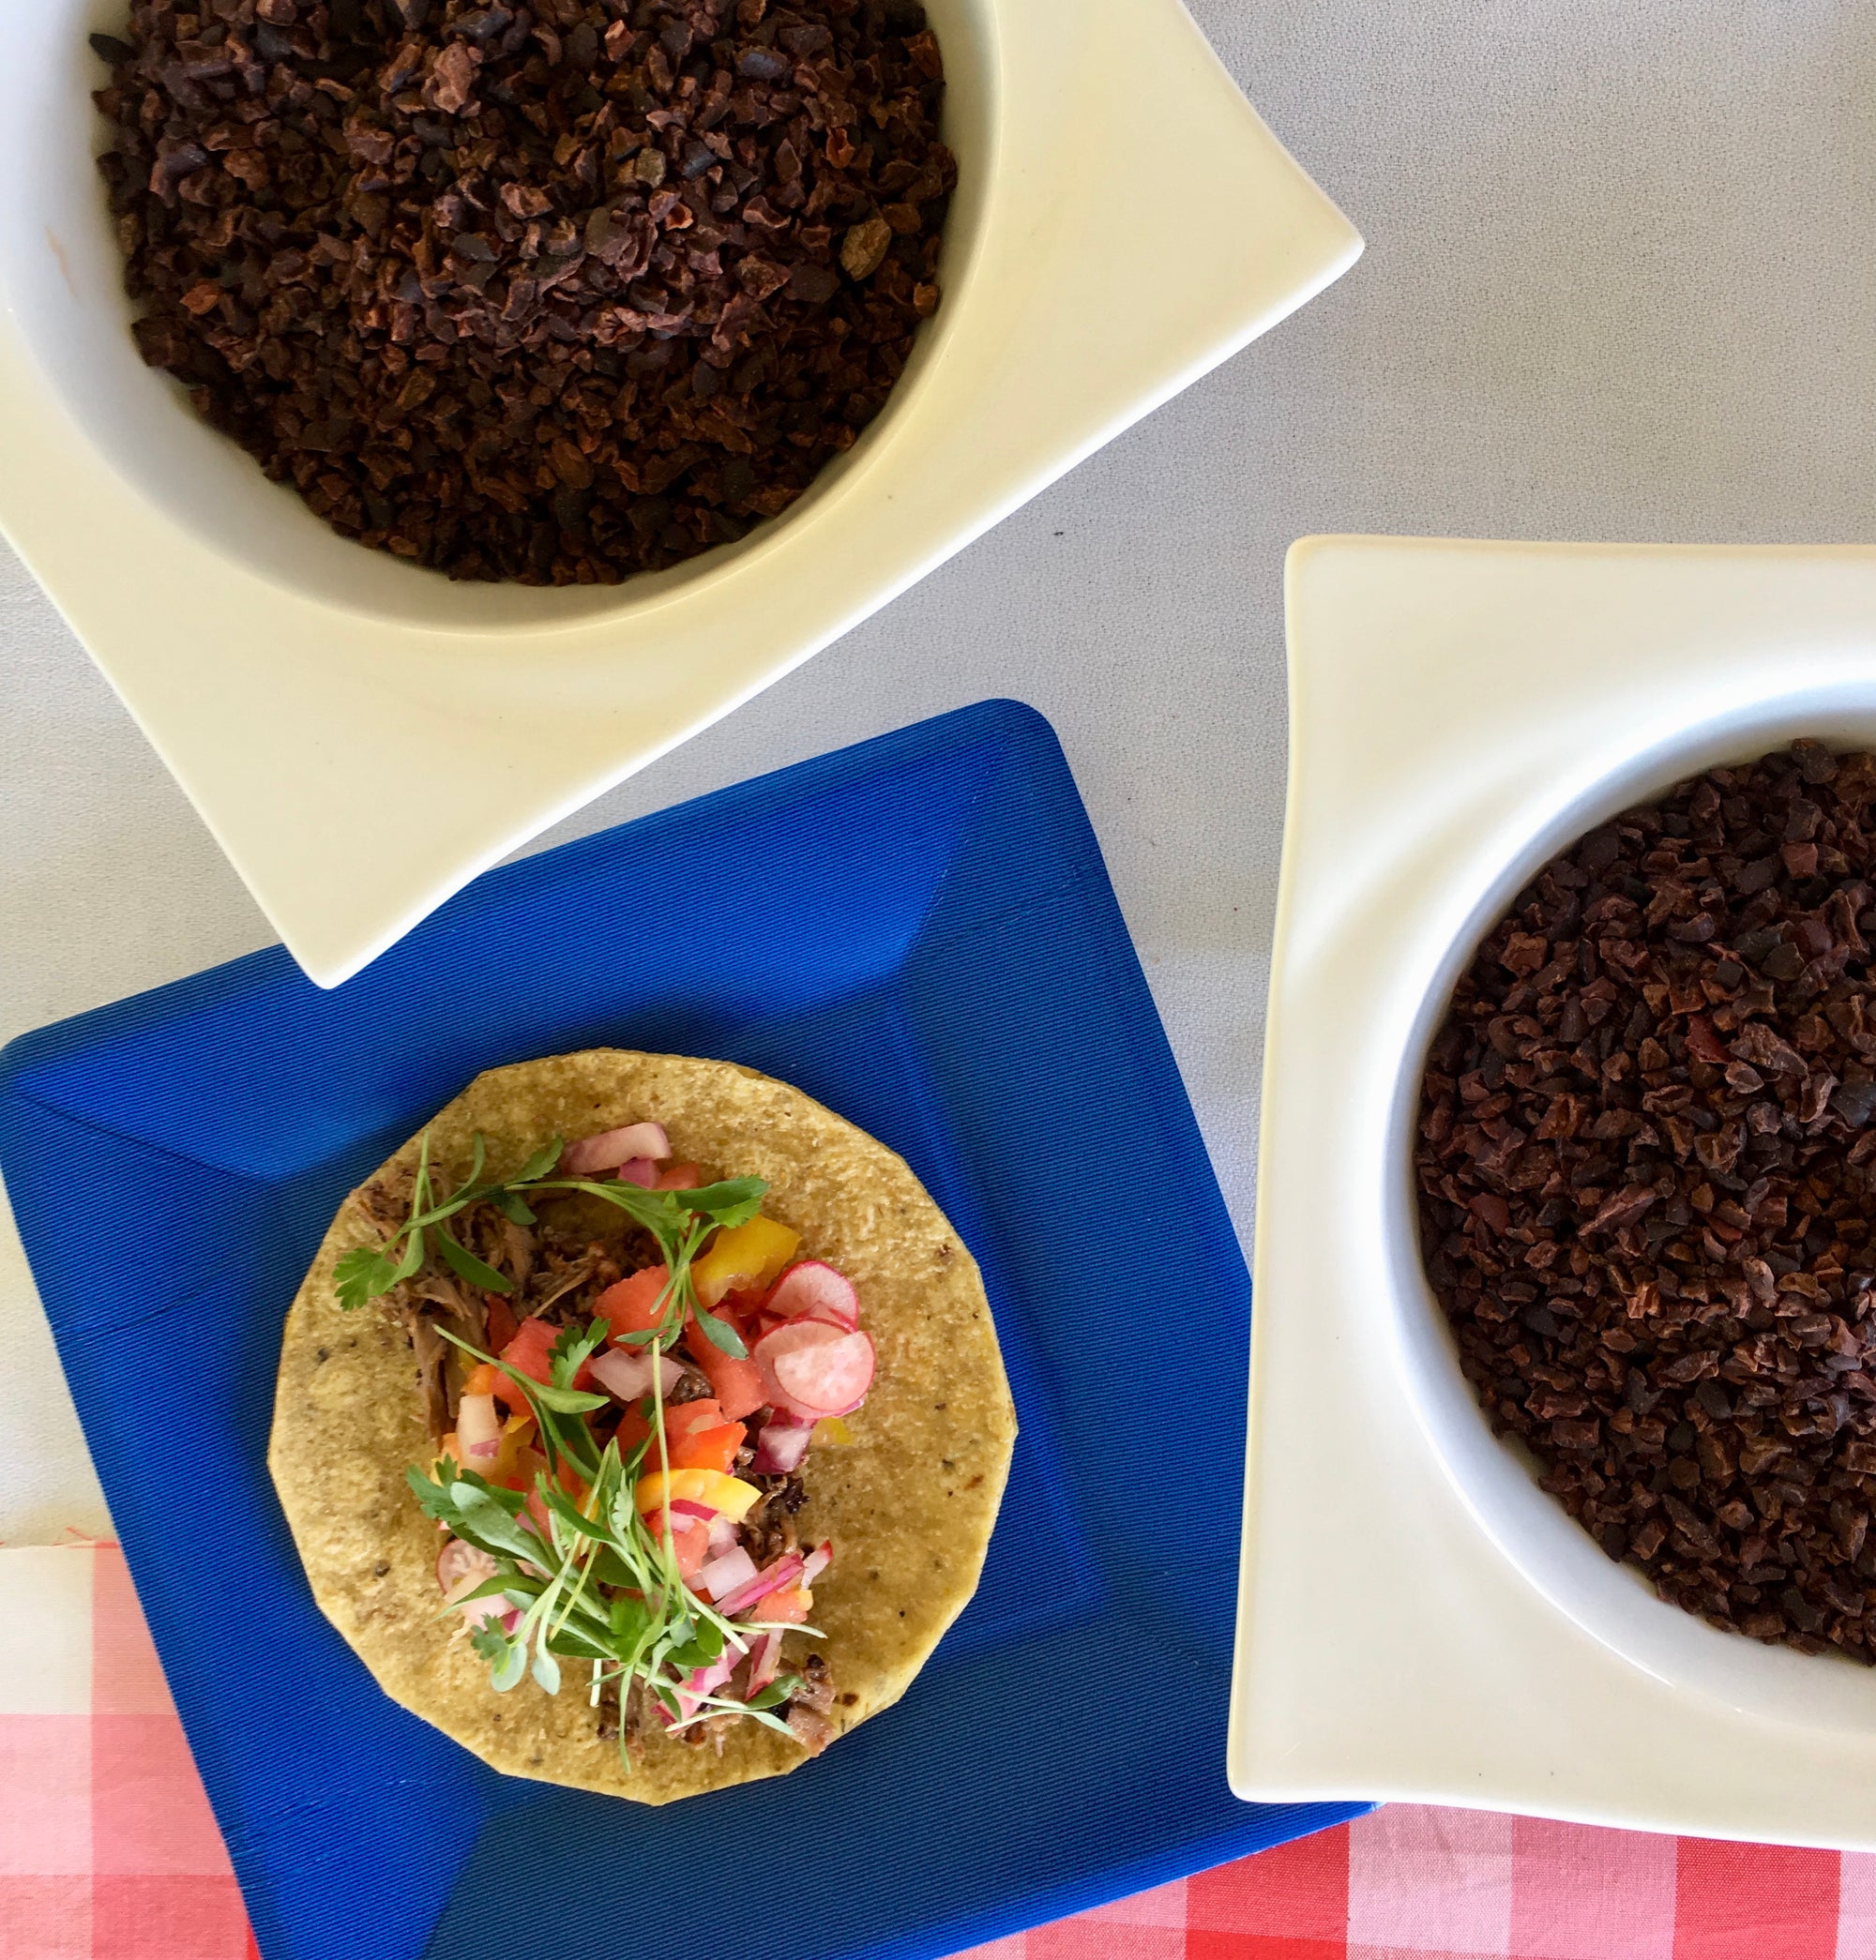 Summer Pork Tacos with Bixby Cacao Nibs (recipe included)